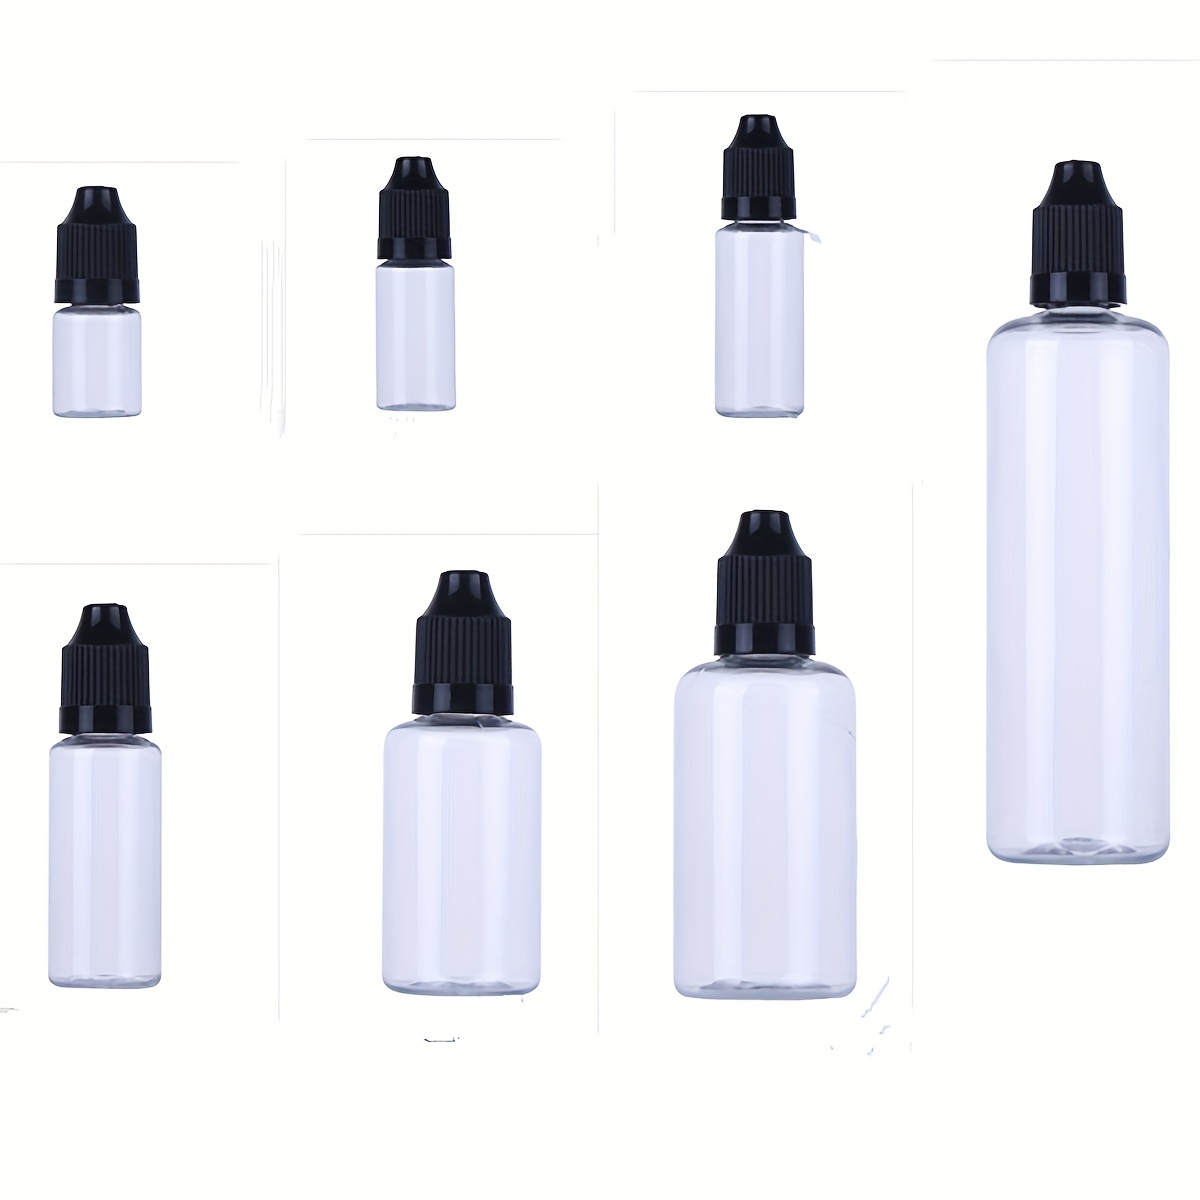 

10pcs Thin Tip Dropper Bottles, Empty Squeeze Dropper Bottles, Pet Squeezable Liquid Eye Dropper Bottle With Cap, 5/10/15/20/25/30/50/100ml - Travel Accessories